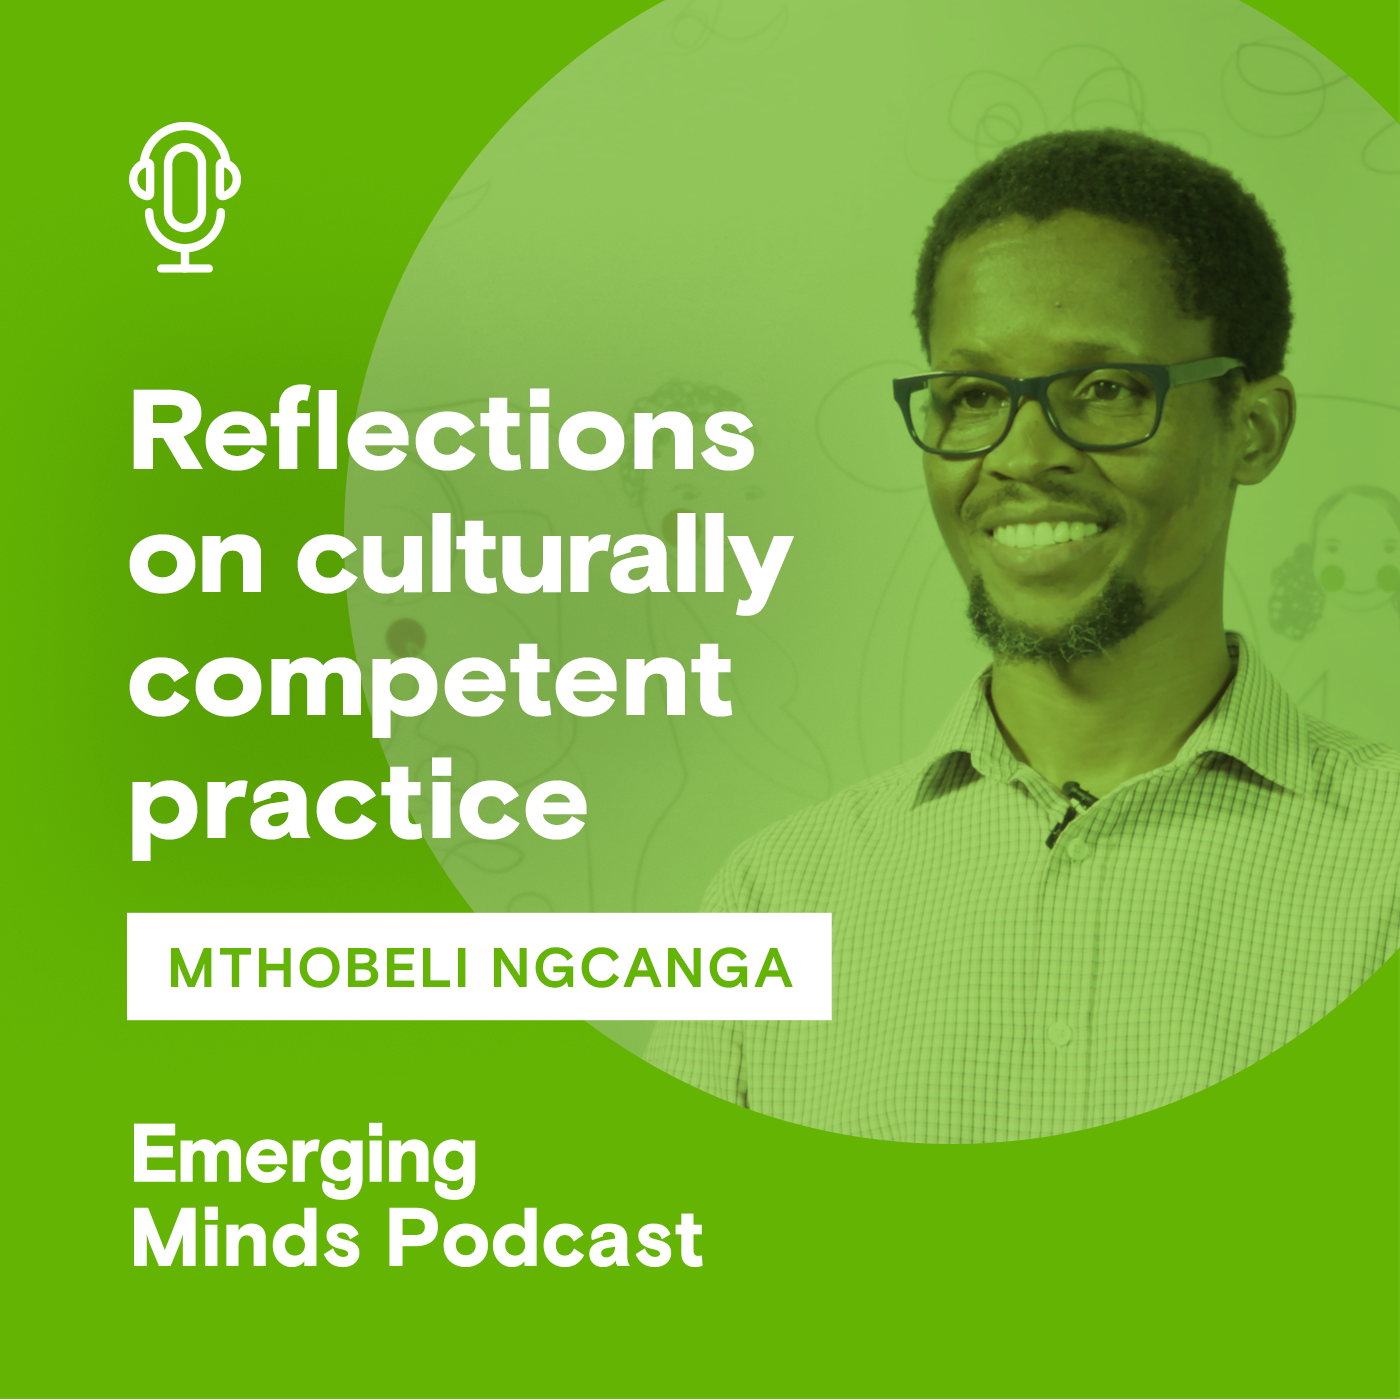 Re-release: Reflections on culturally competent practice with Mthobeli Ngcanga